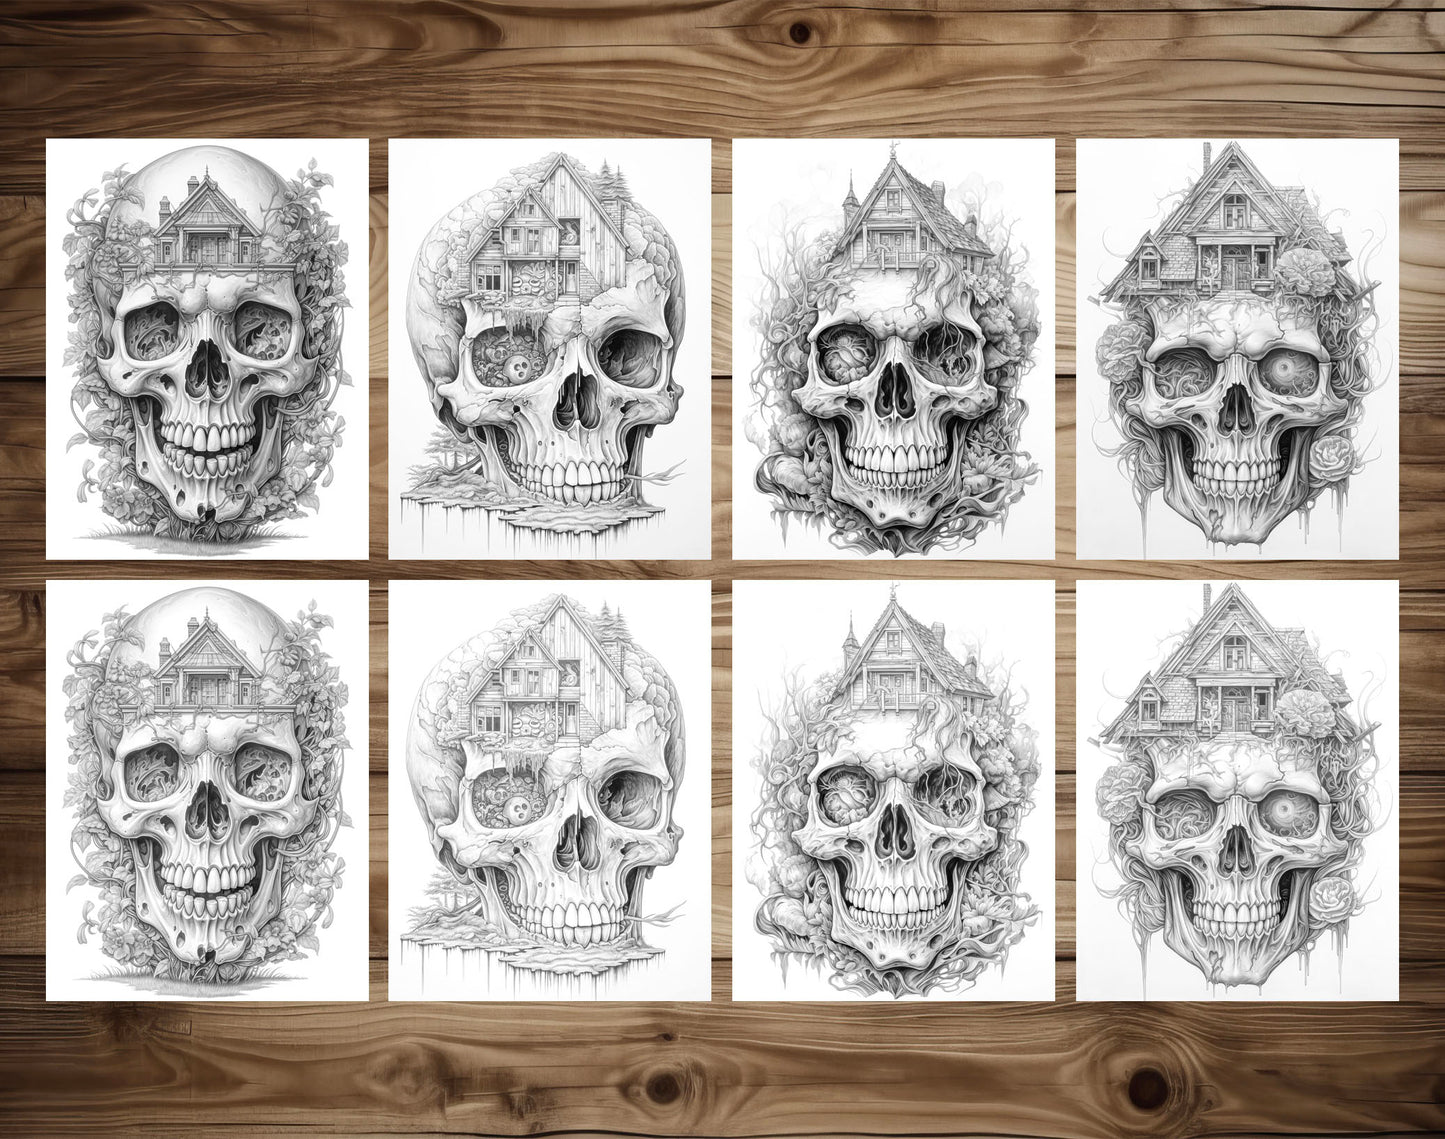 40 Skull House Grayscale Coloring Pages - Halloween Coloring - Instant Download - Printable PDF Dark/Light